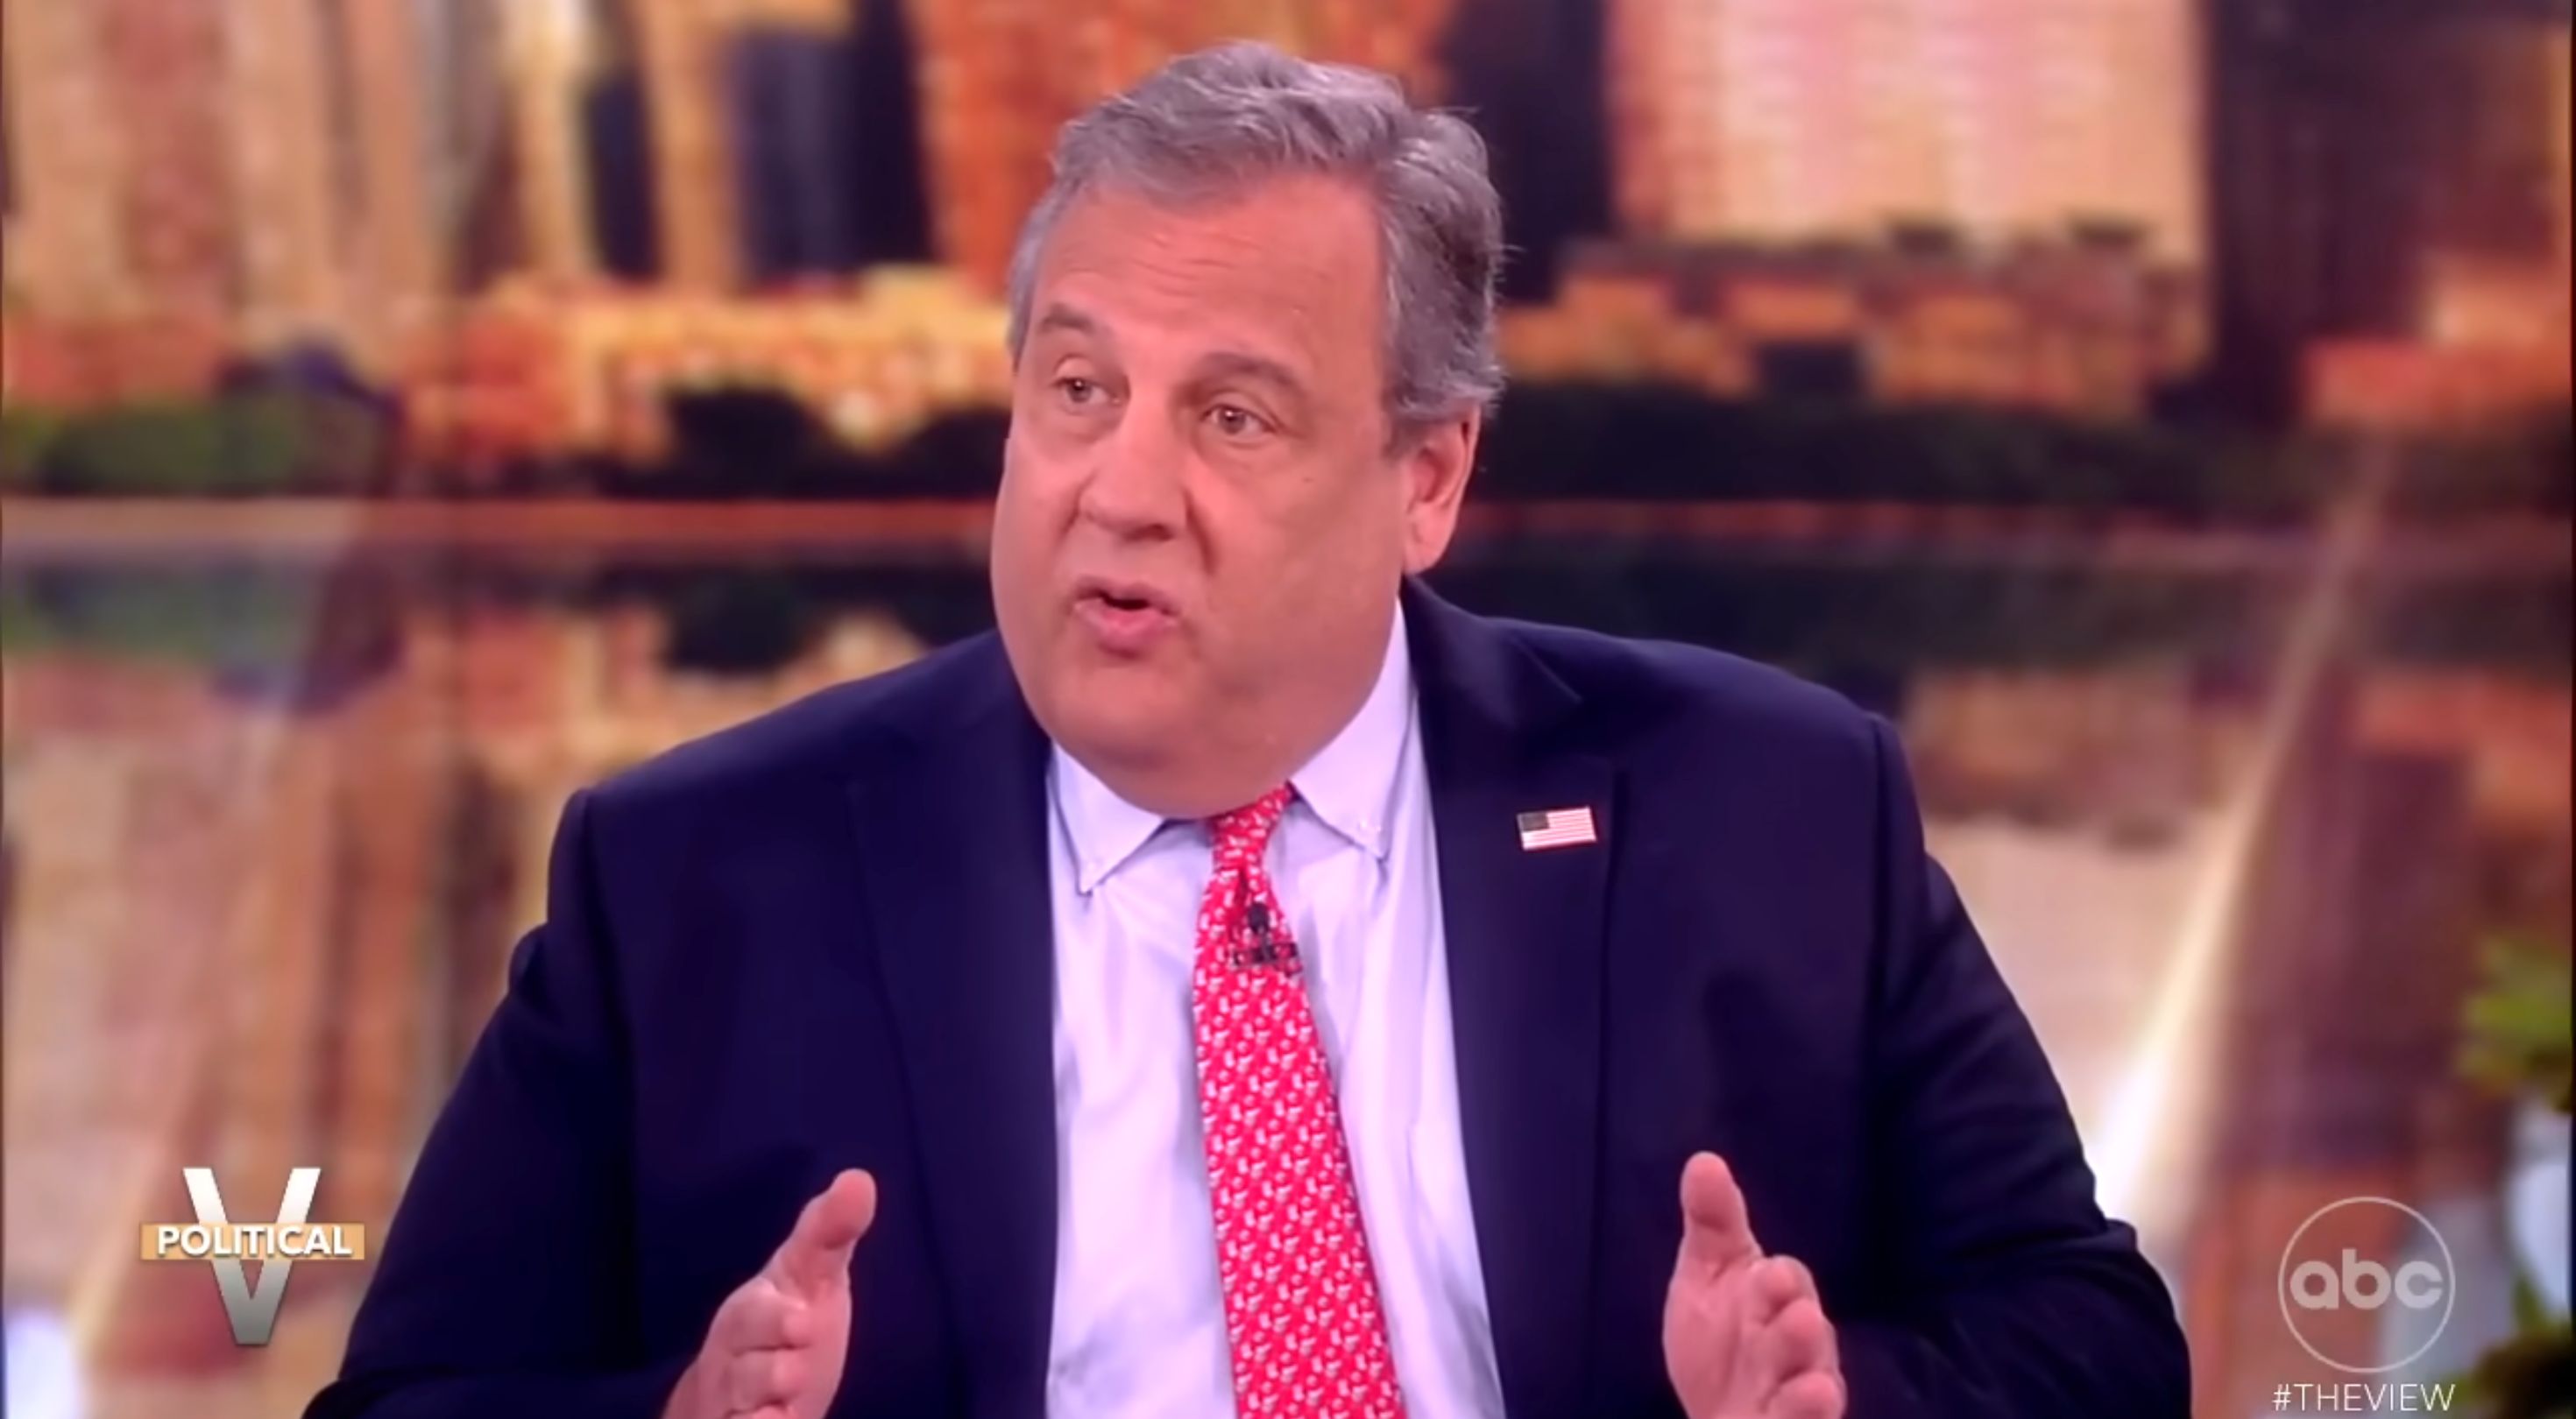 chris christie spots the moment when gop race 'was over': it told voters 'this is ok'